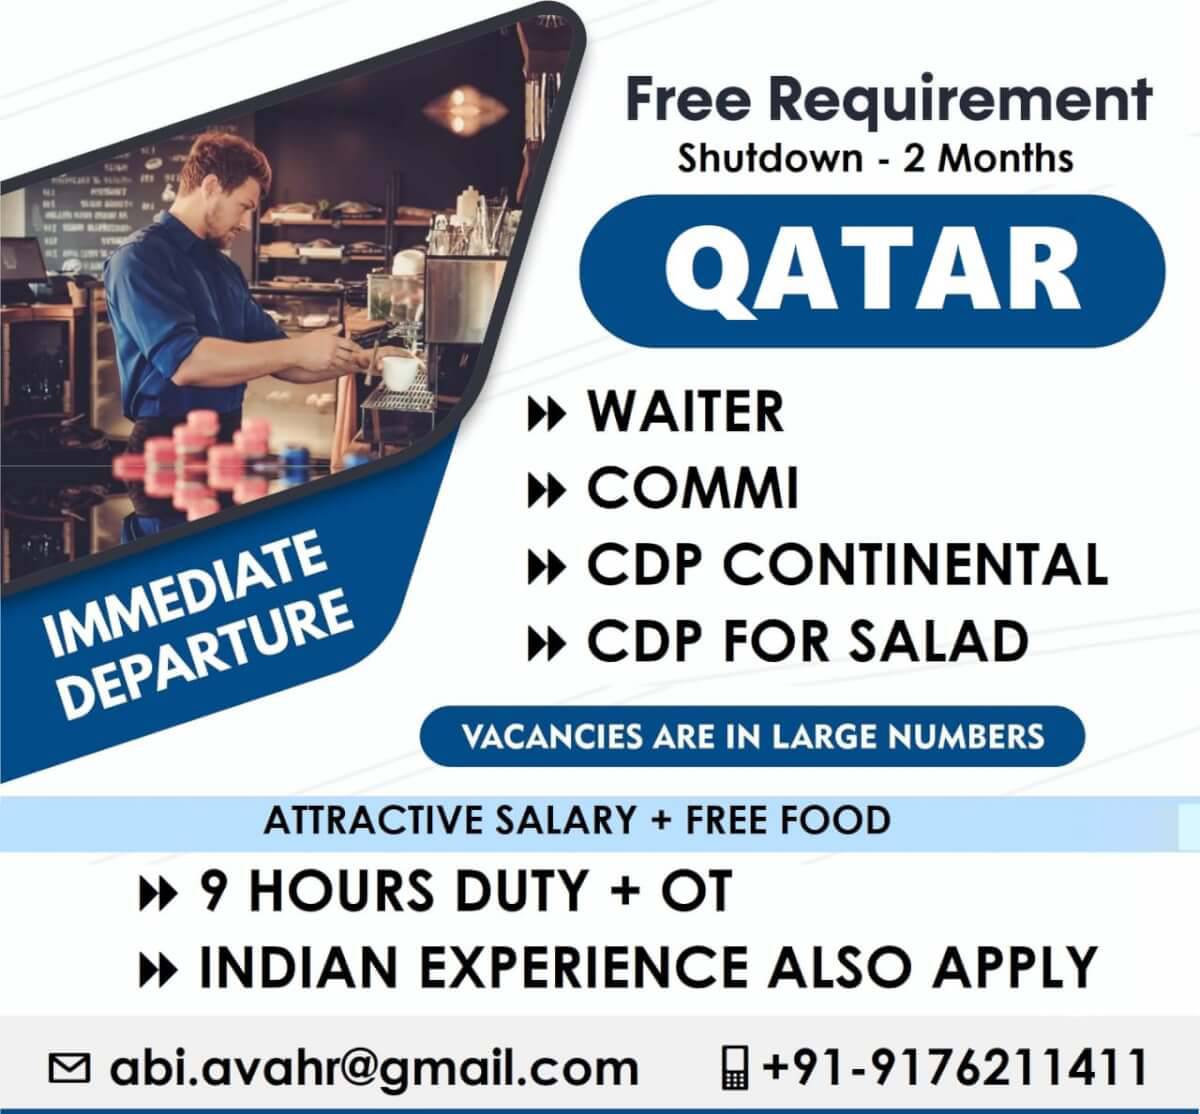 You are currently viewing Shutdown Project Jobs | Want for Qatar